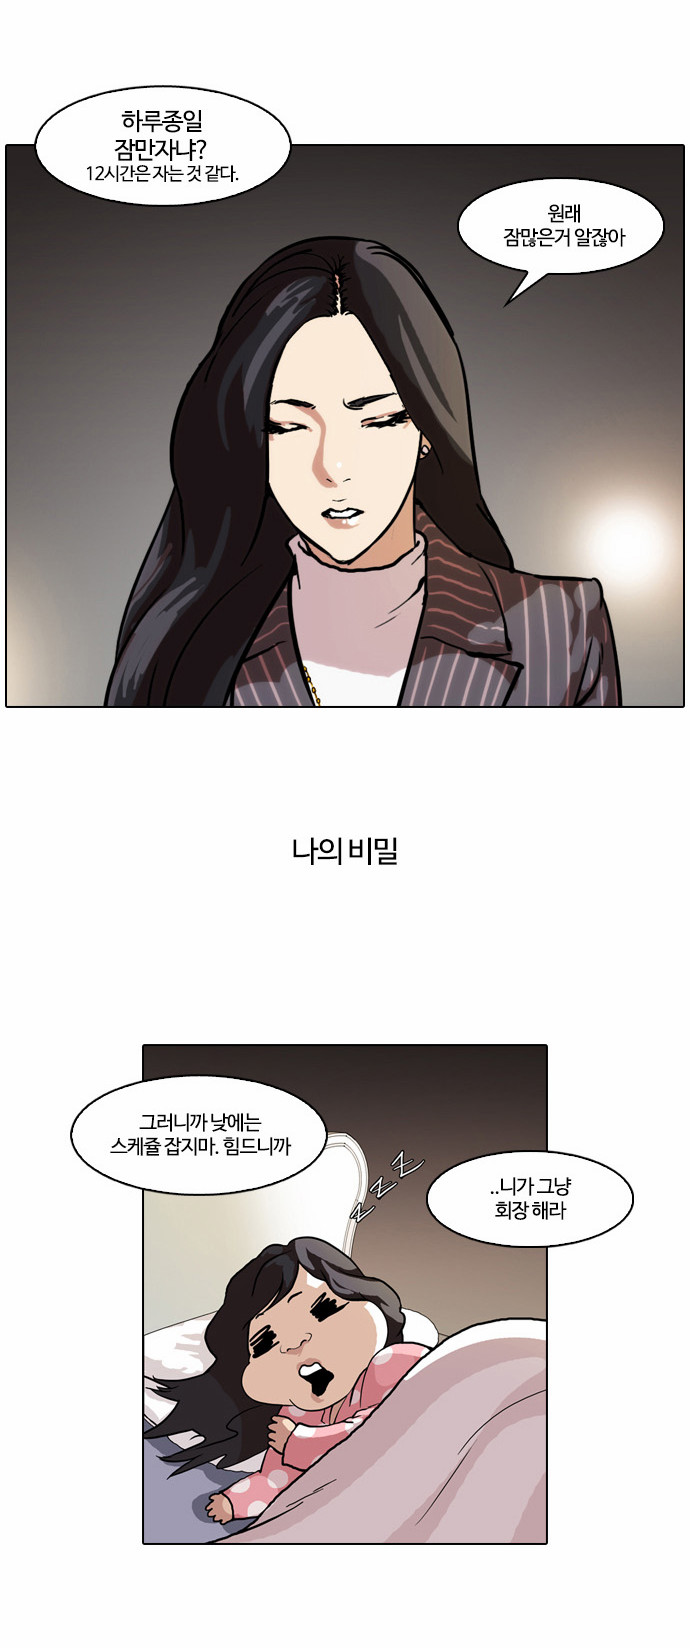 Lookism - Chapter 60 - Page 2